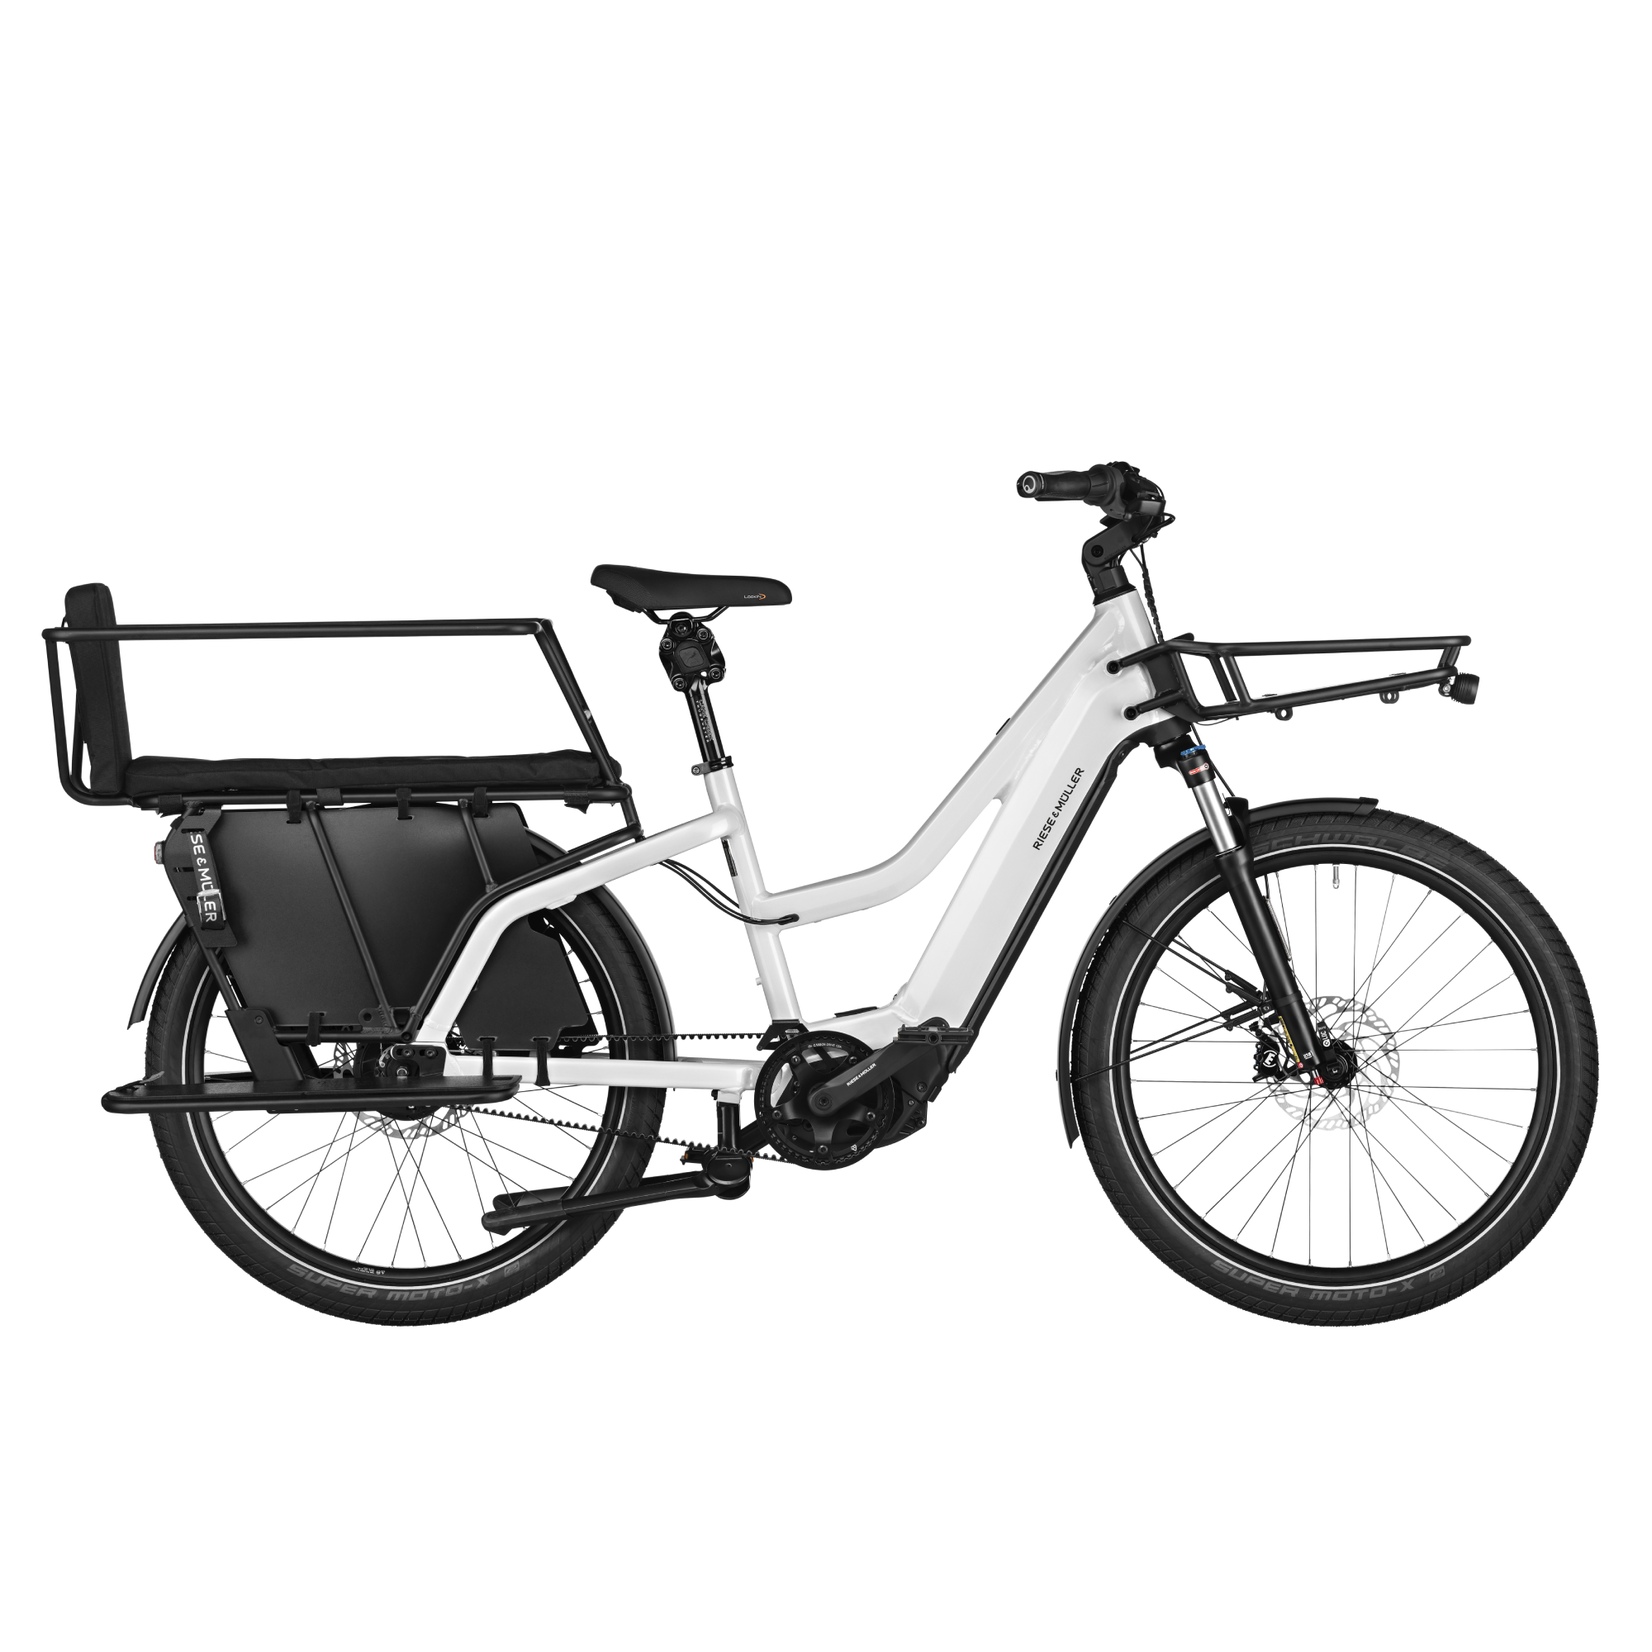 Riese & Müller Riese & Müller Multicharger Mixte GT Vario | 750 Wh battery | Kiox 300 | Pearl White/Black Matt | 47 cm | Cargo front carrier | Additional chain lock with bag | Safety bar kit